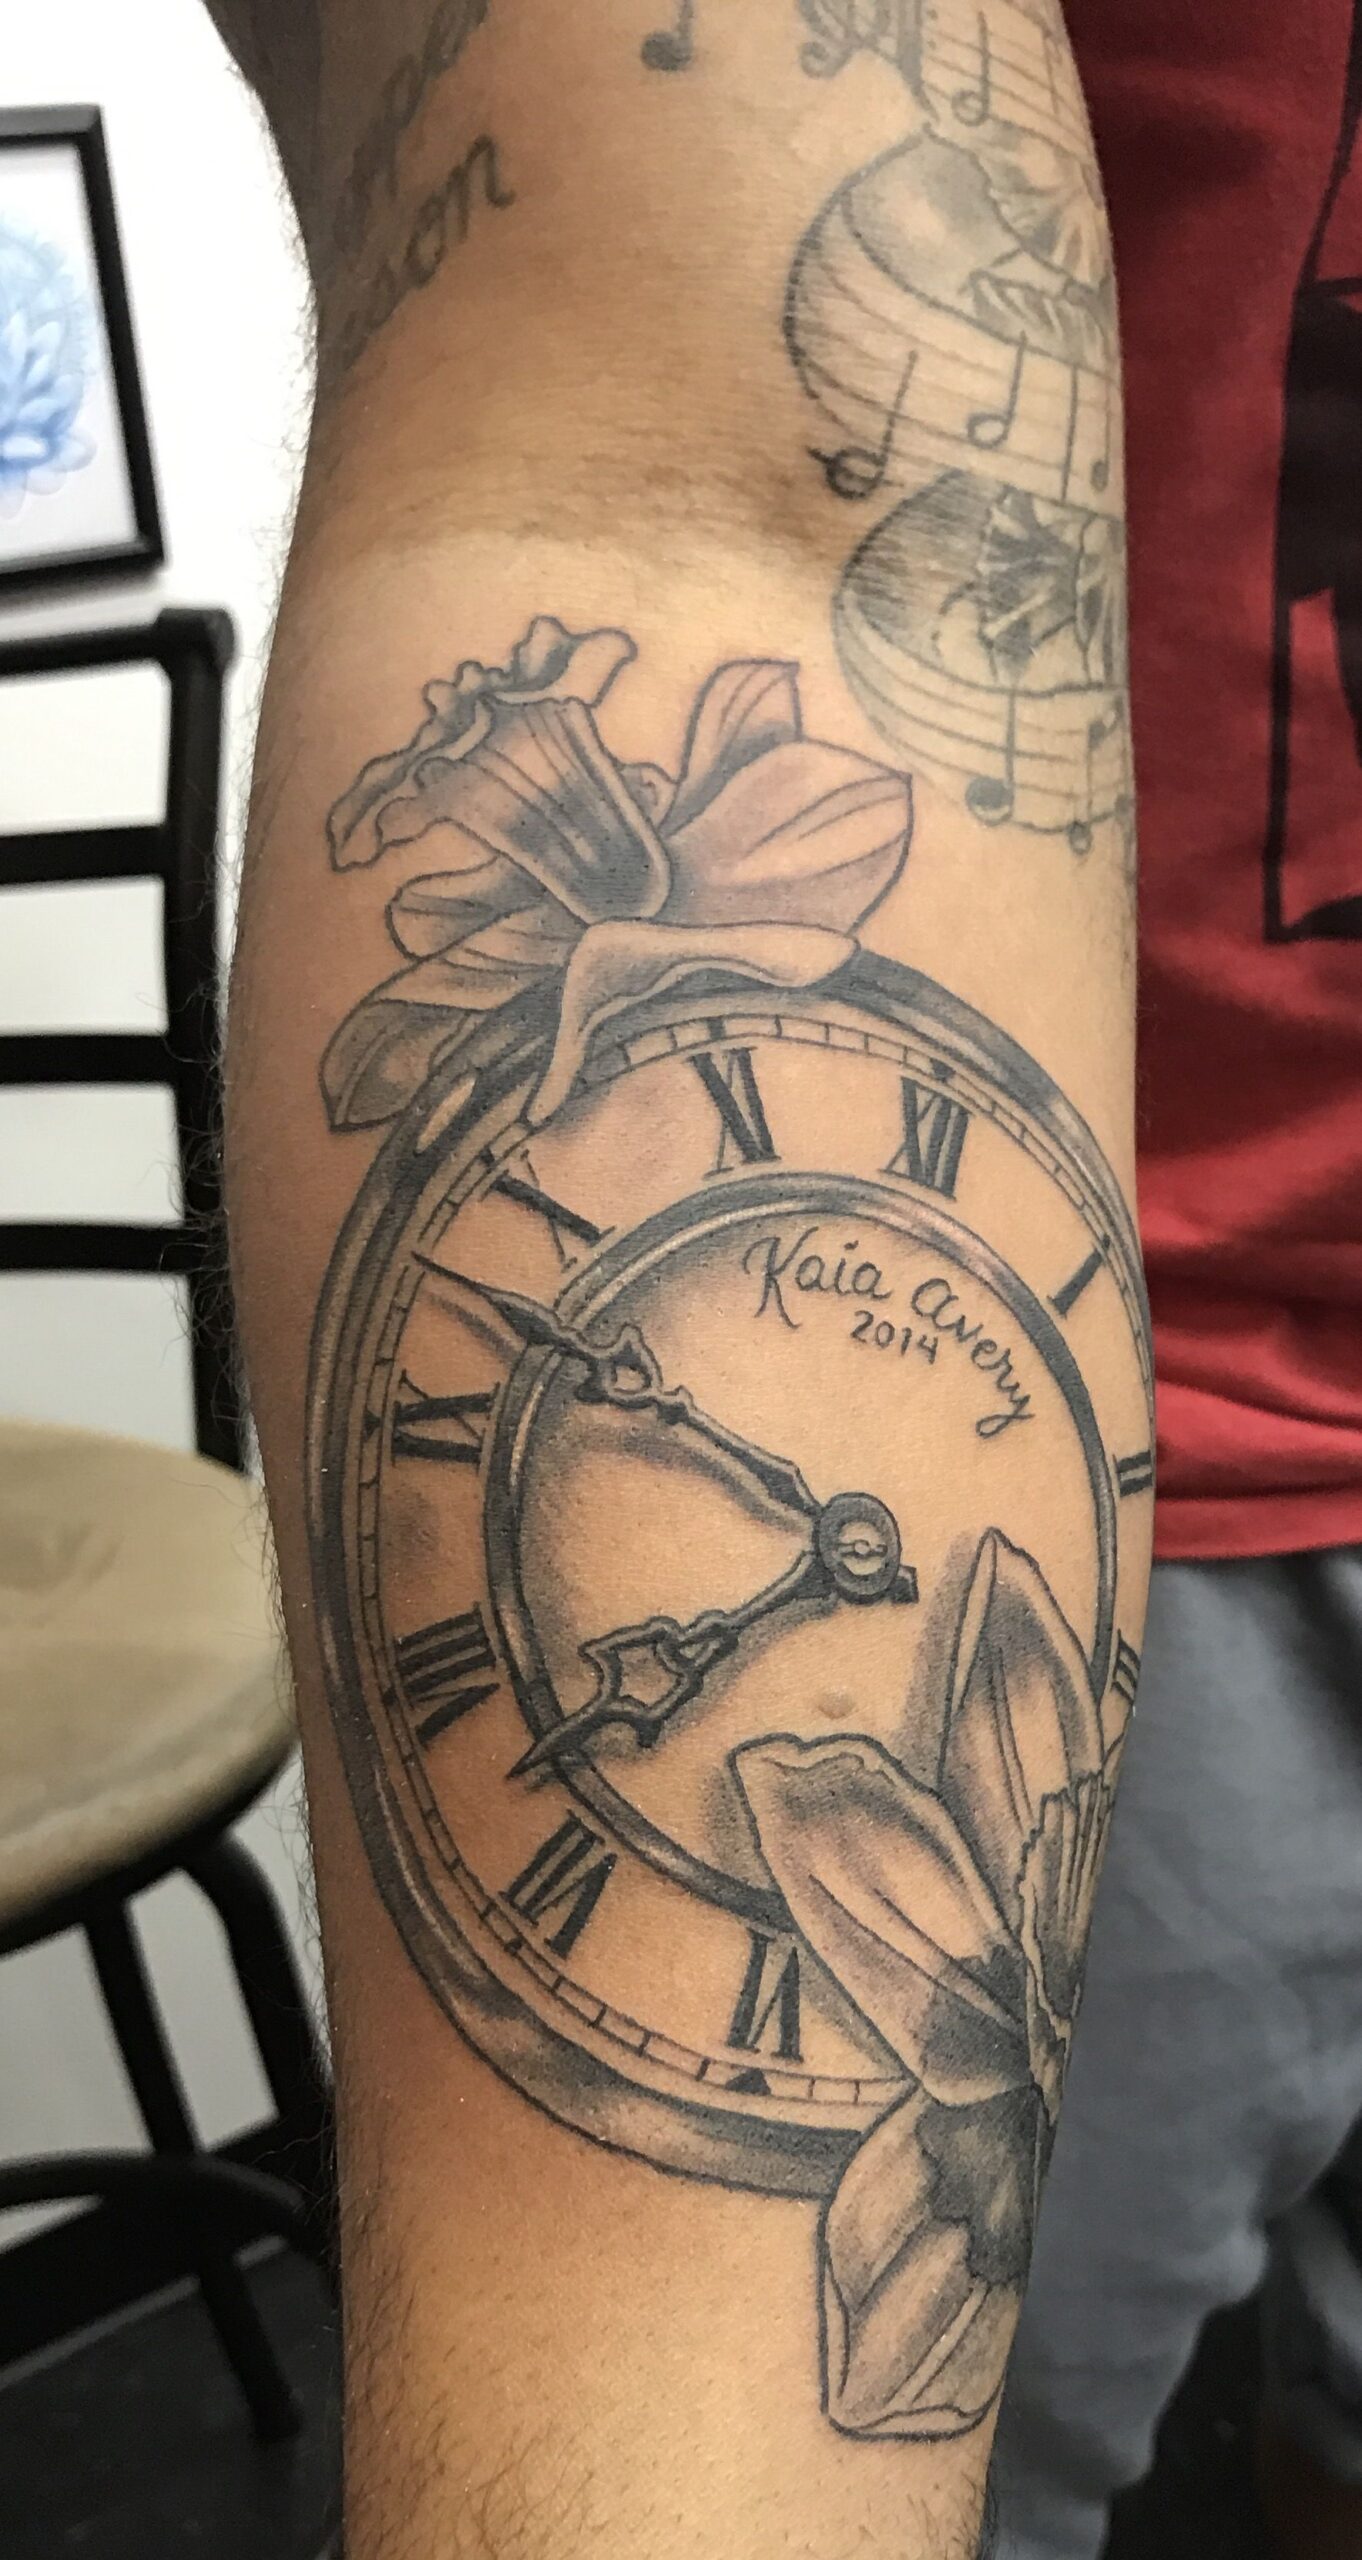 Birth Clock Tattoos How To Find The Best Designs For Your Skin Type Body Tattoo Art